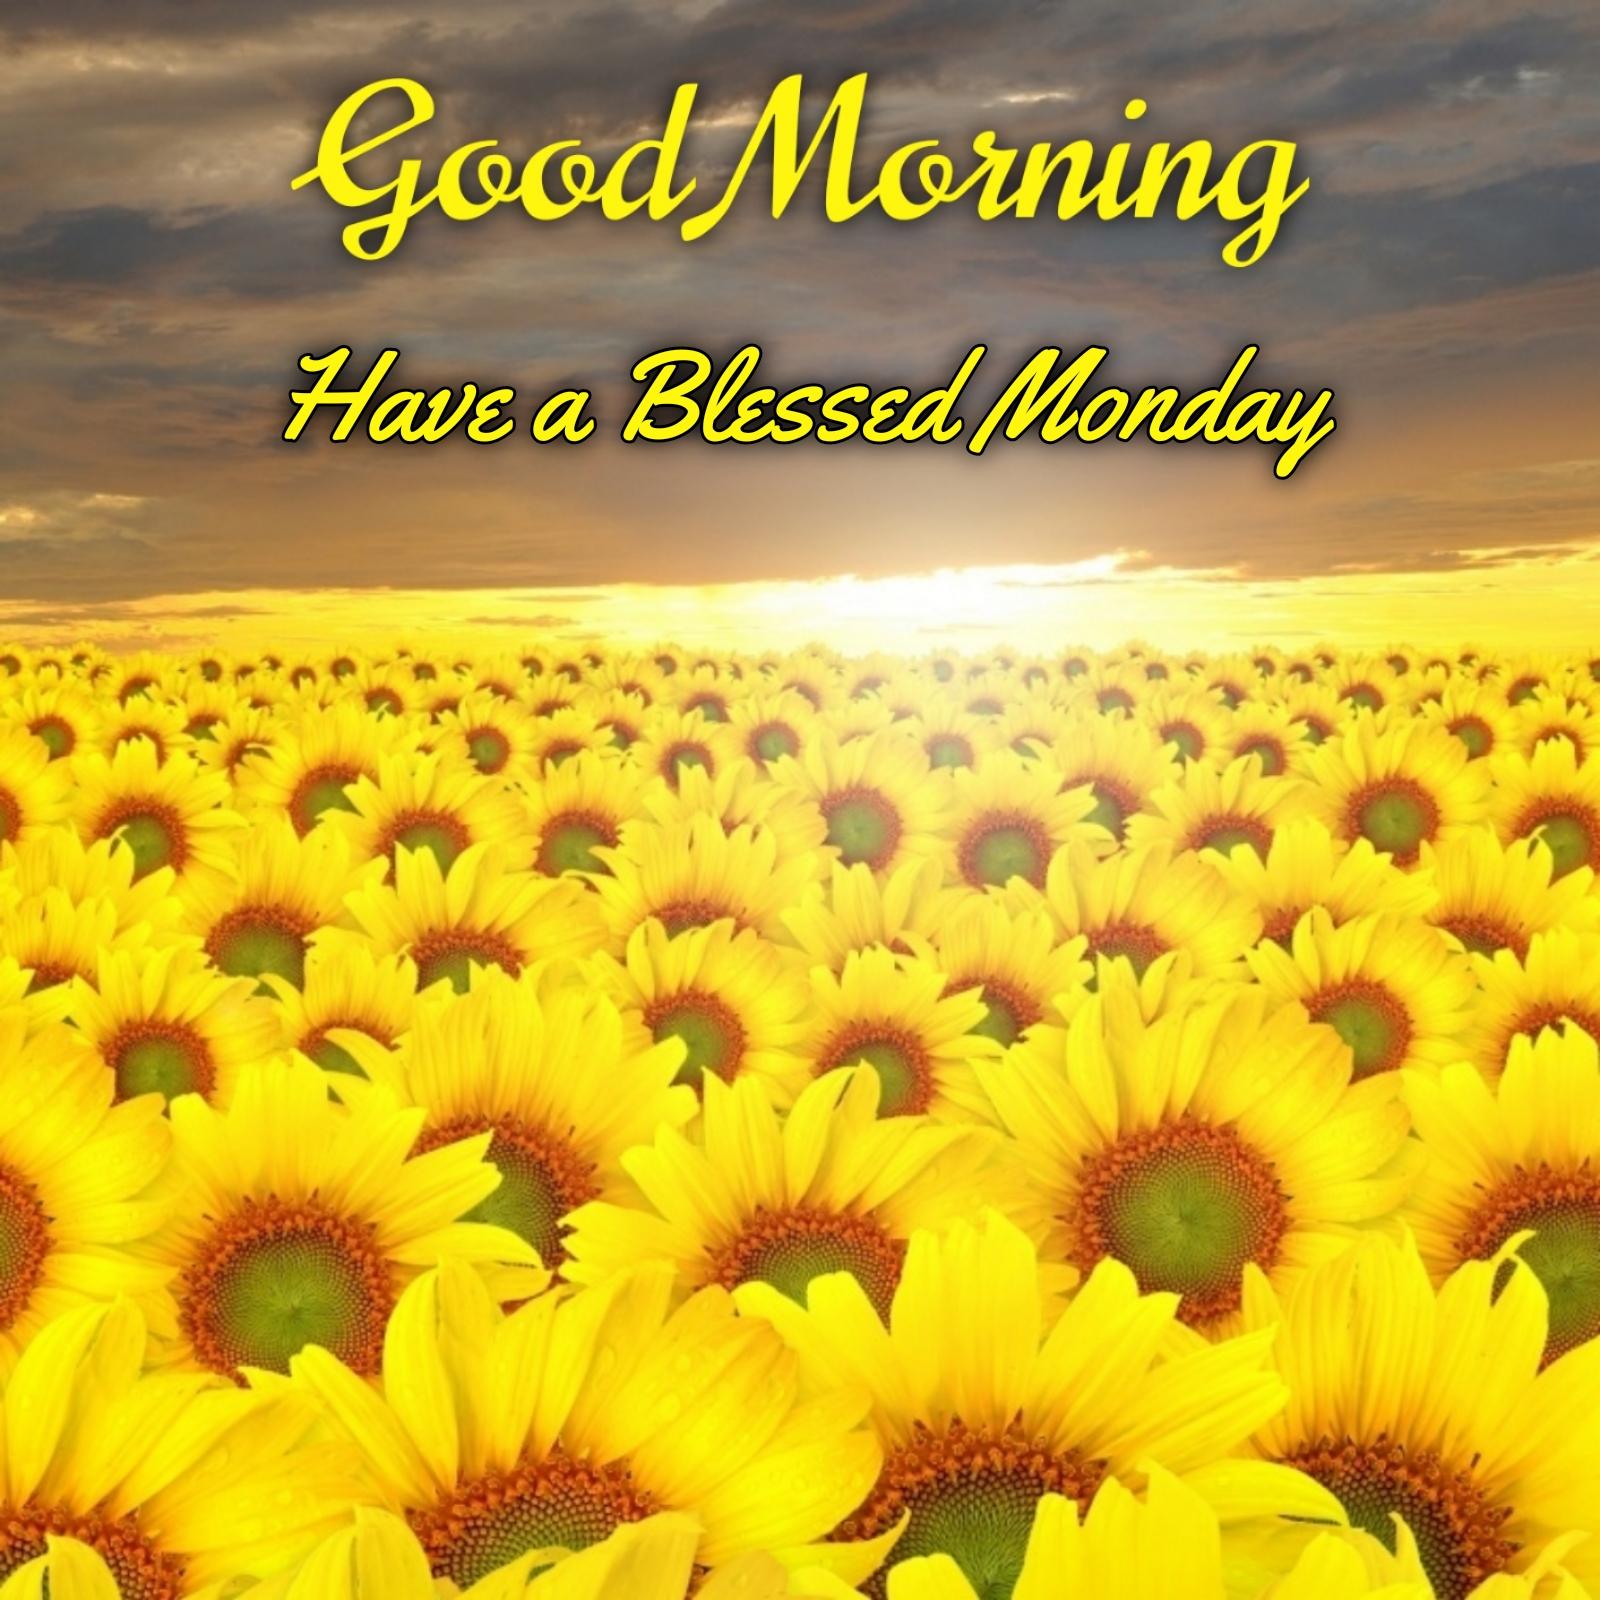 Good Morning Blessed Monday Images